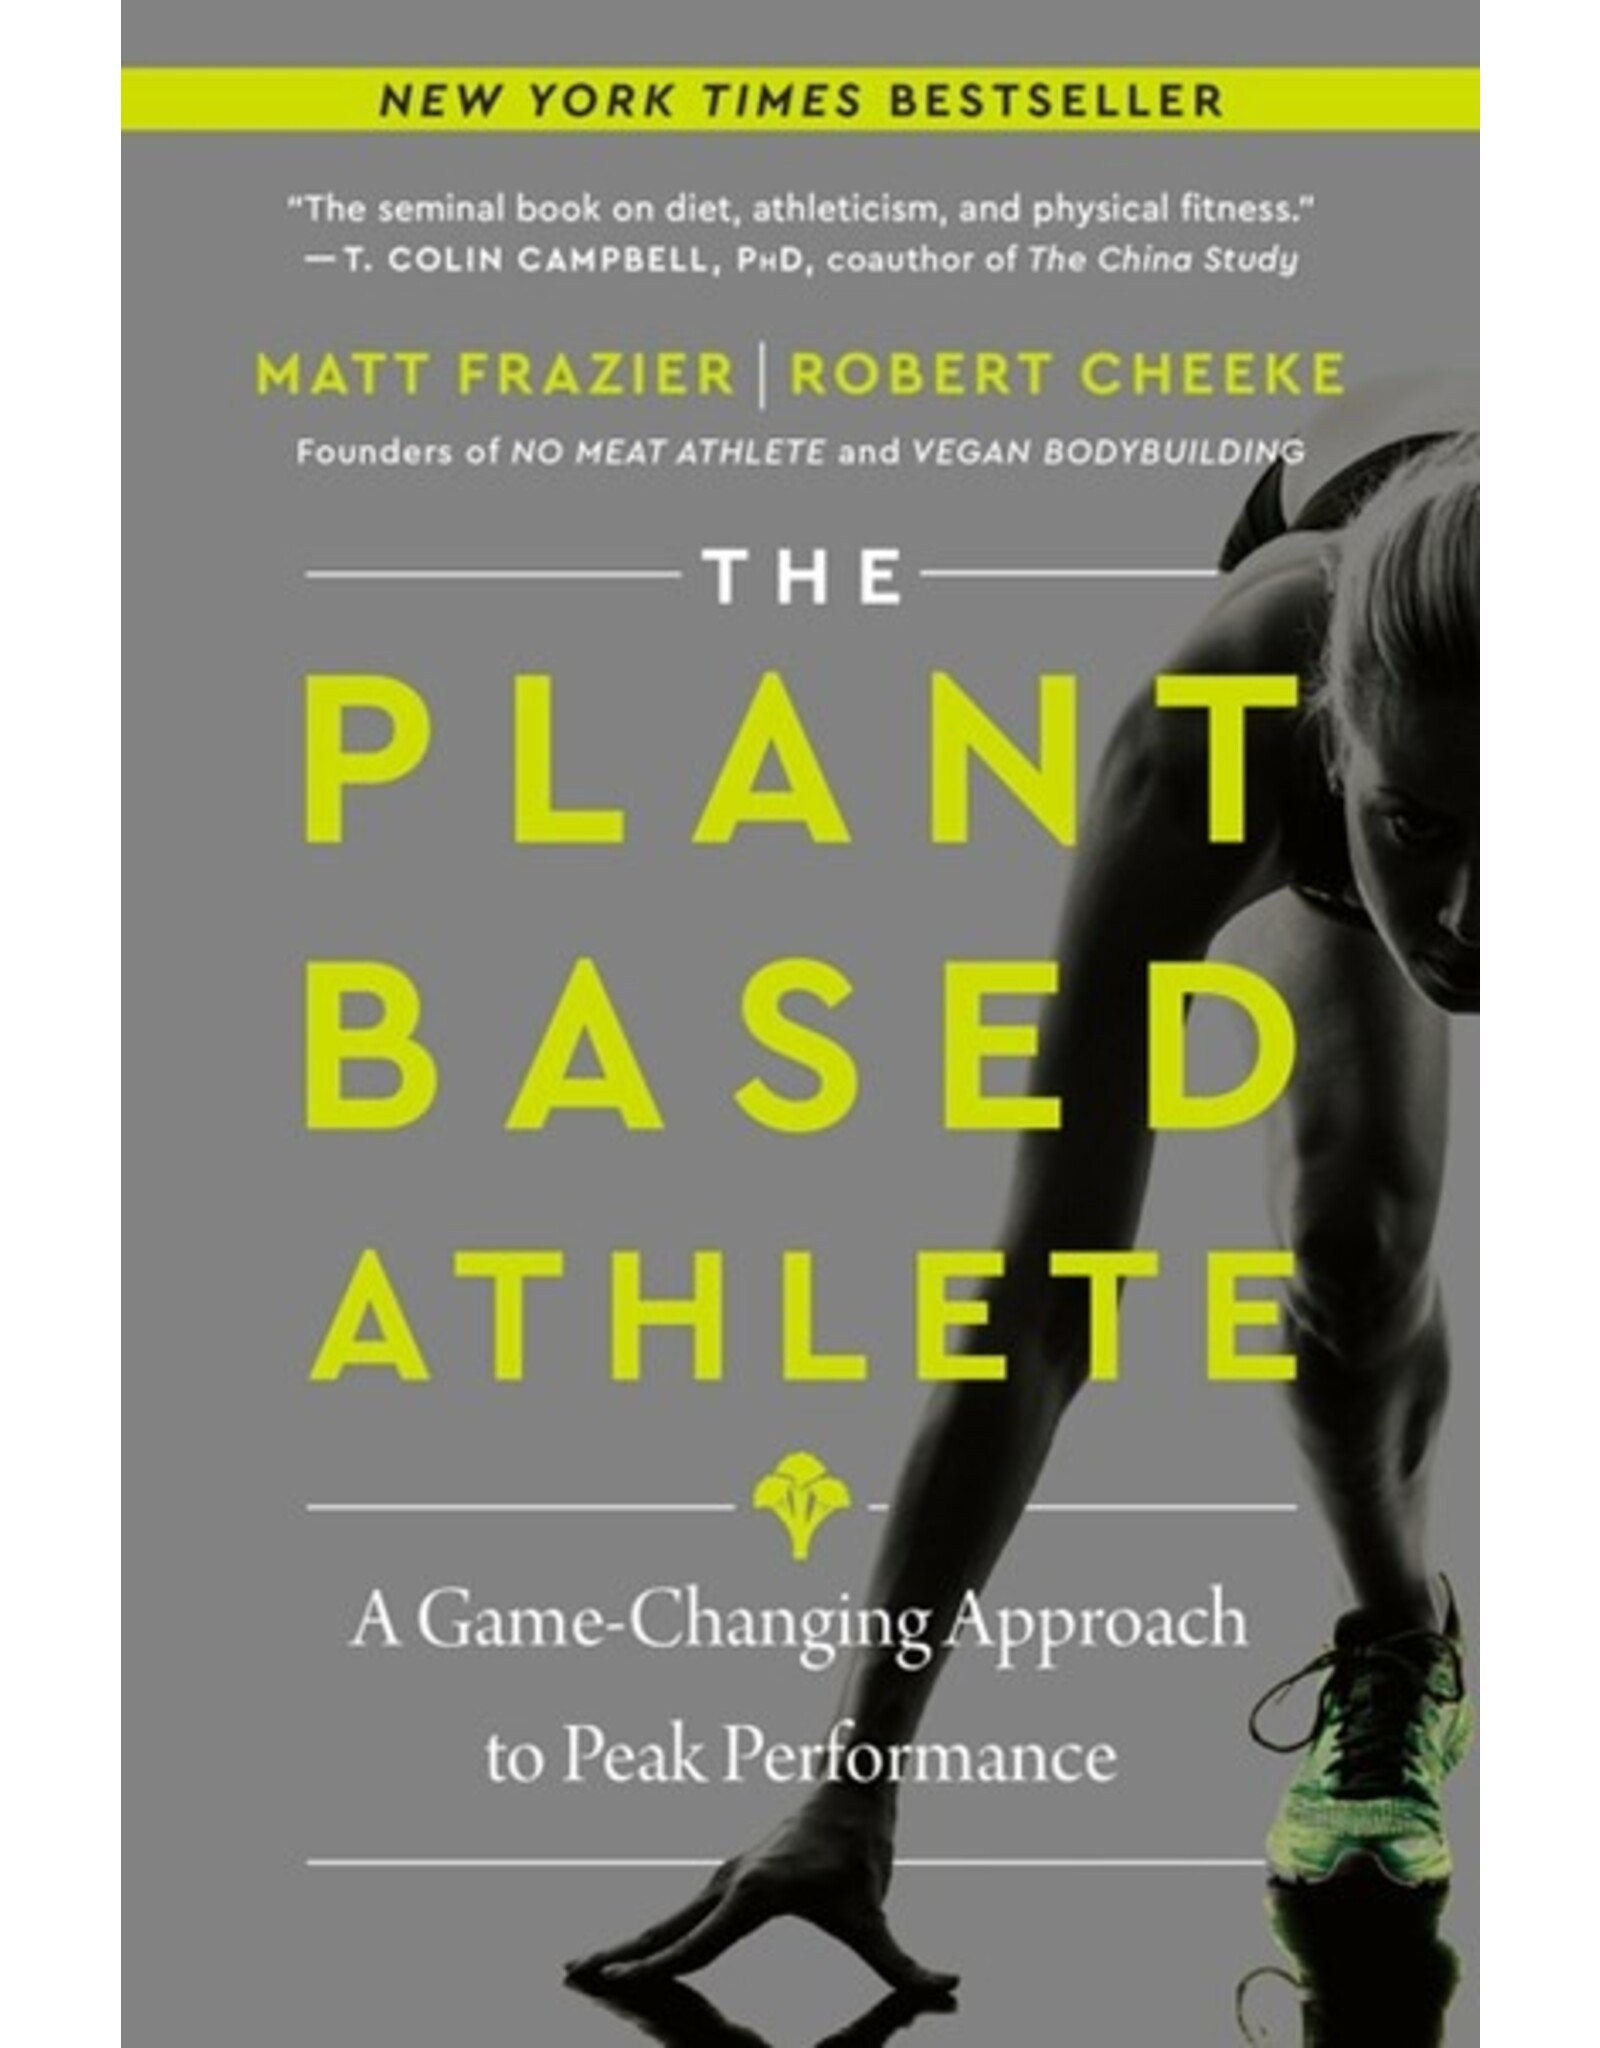 Books The Plant Based Athlete : A Game Changing Approach to Peak Performance by Matt Frazier and Robert Cheeke